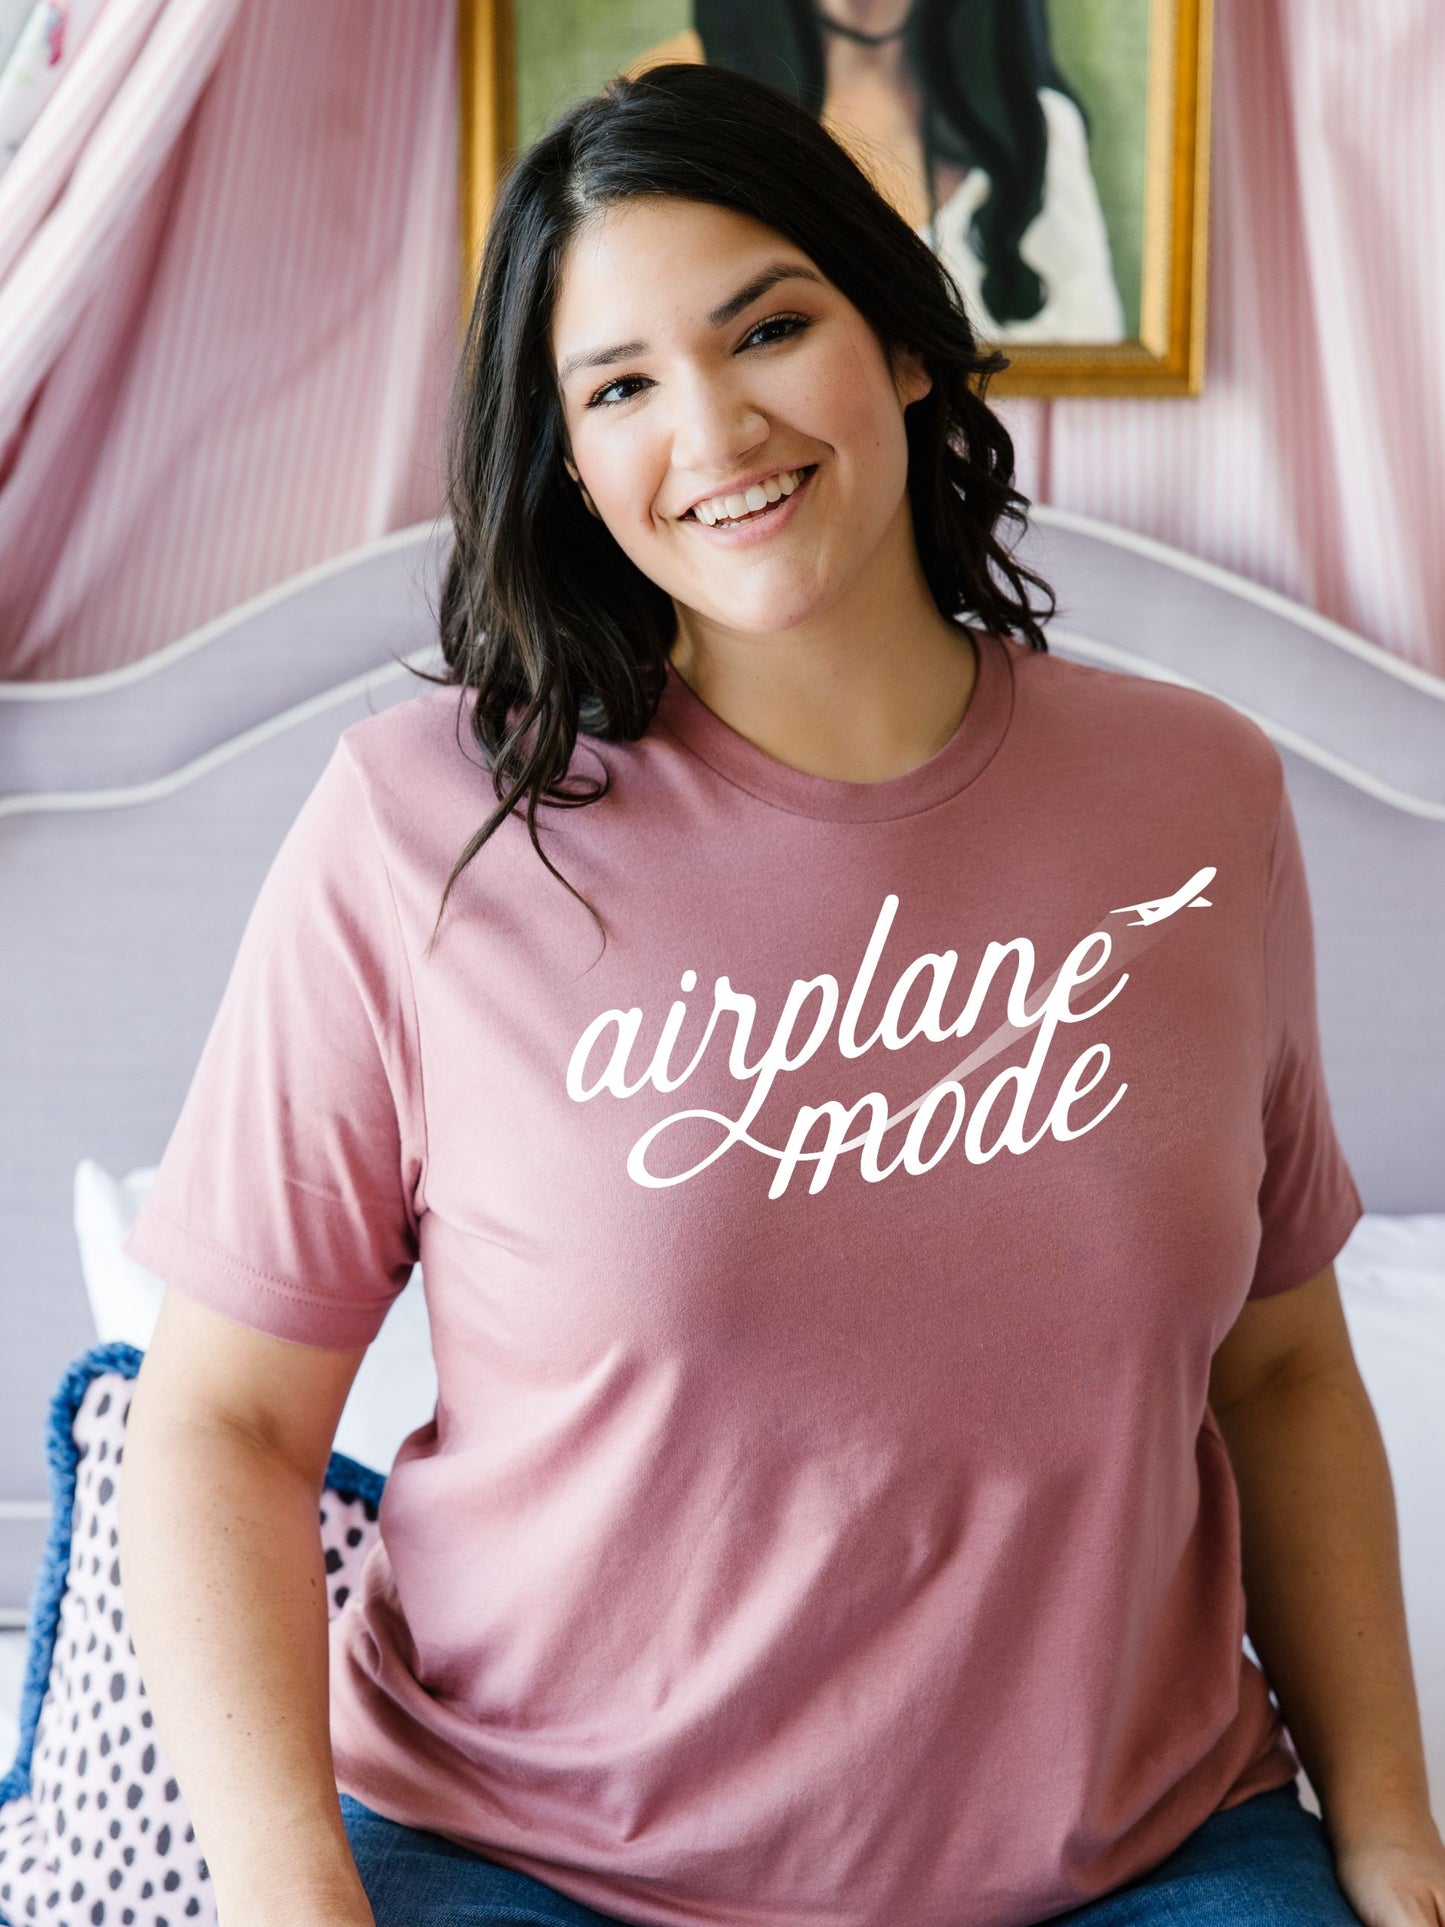 Airplane Mode Shirt in color mauve for travel days and girls trips